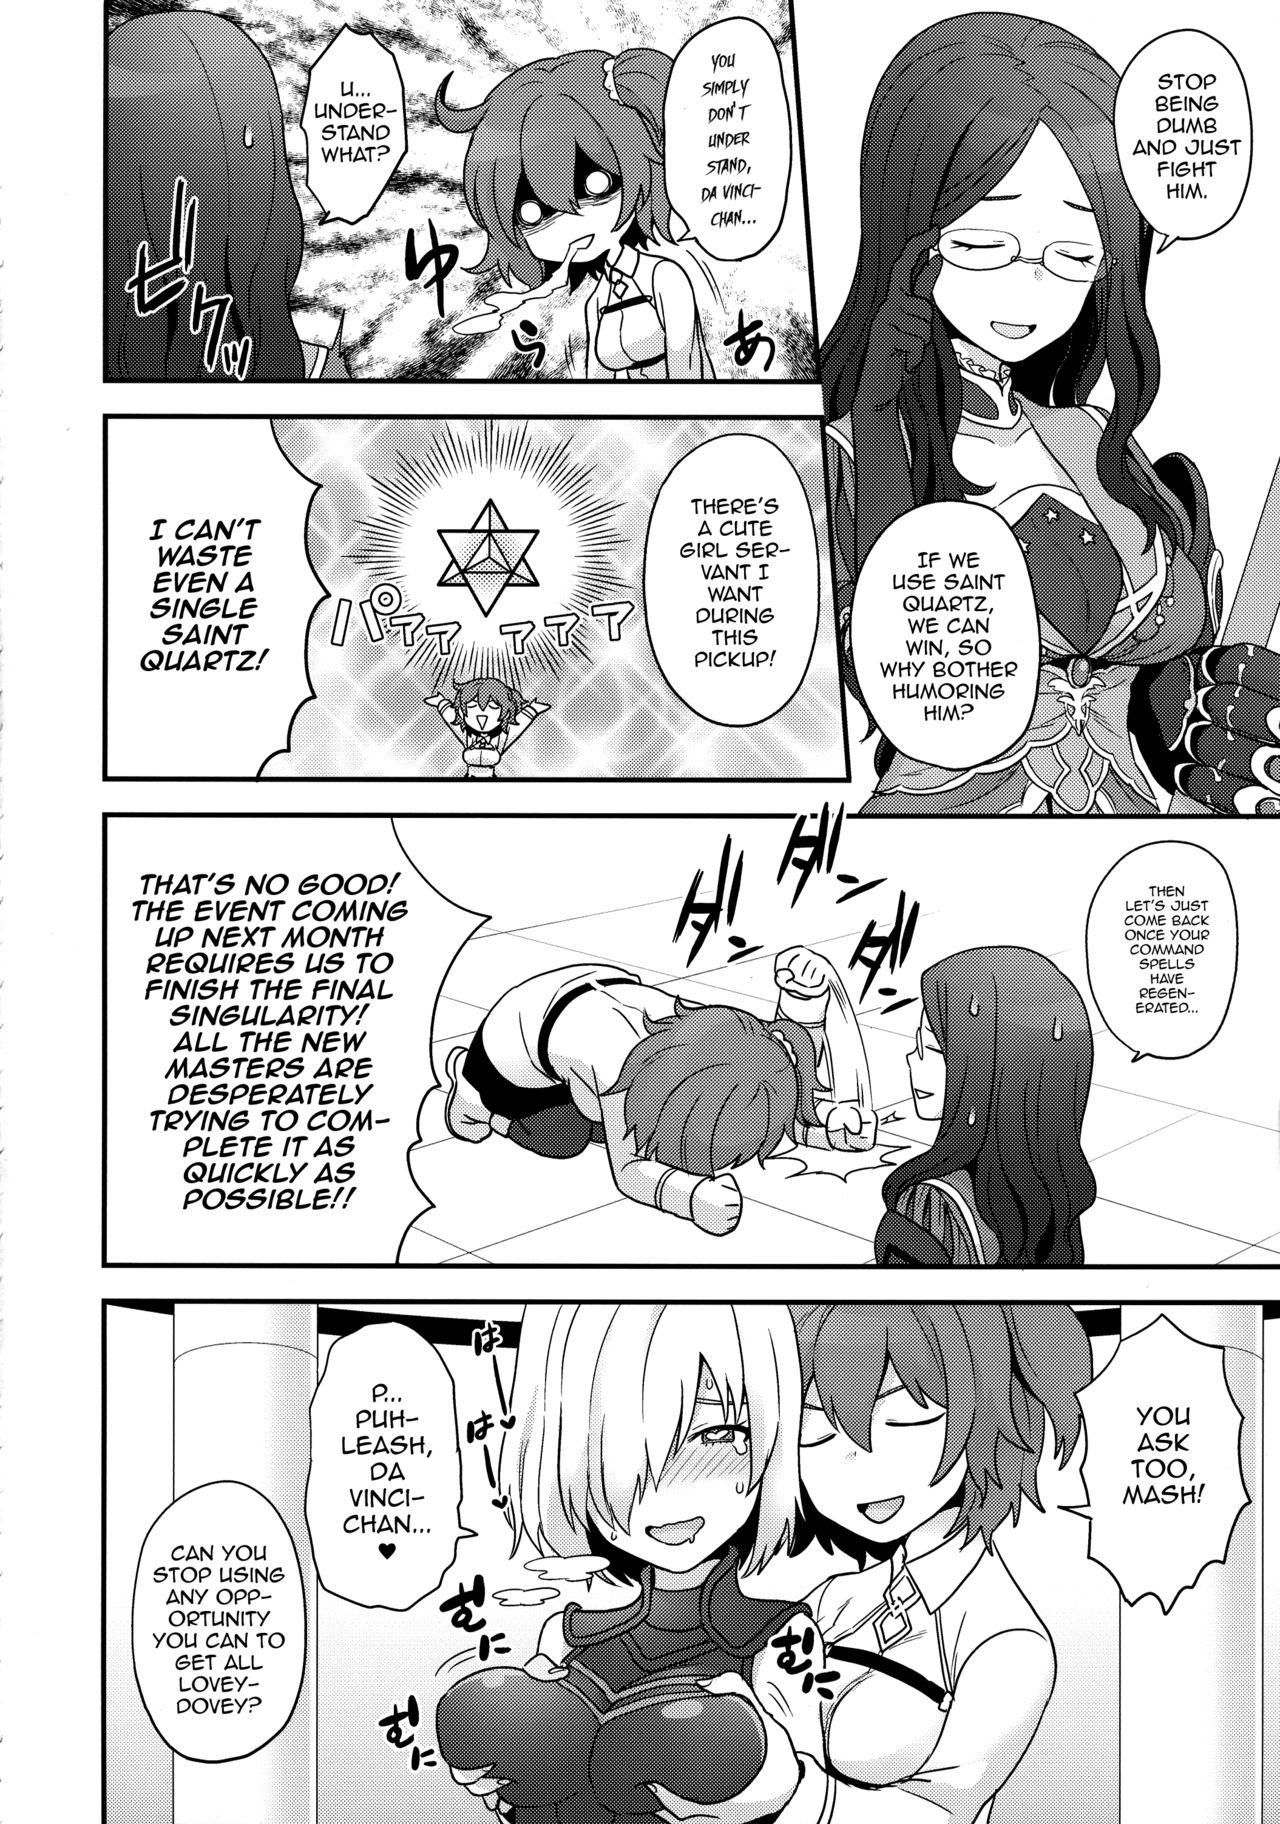 Massages OTKNK? - Fate grand order Liveshow - Page 5